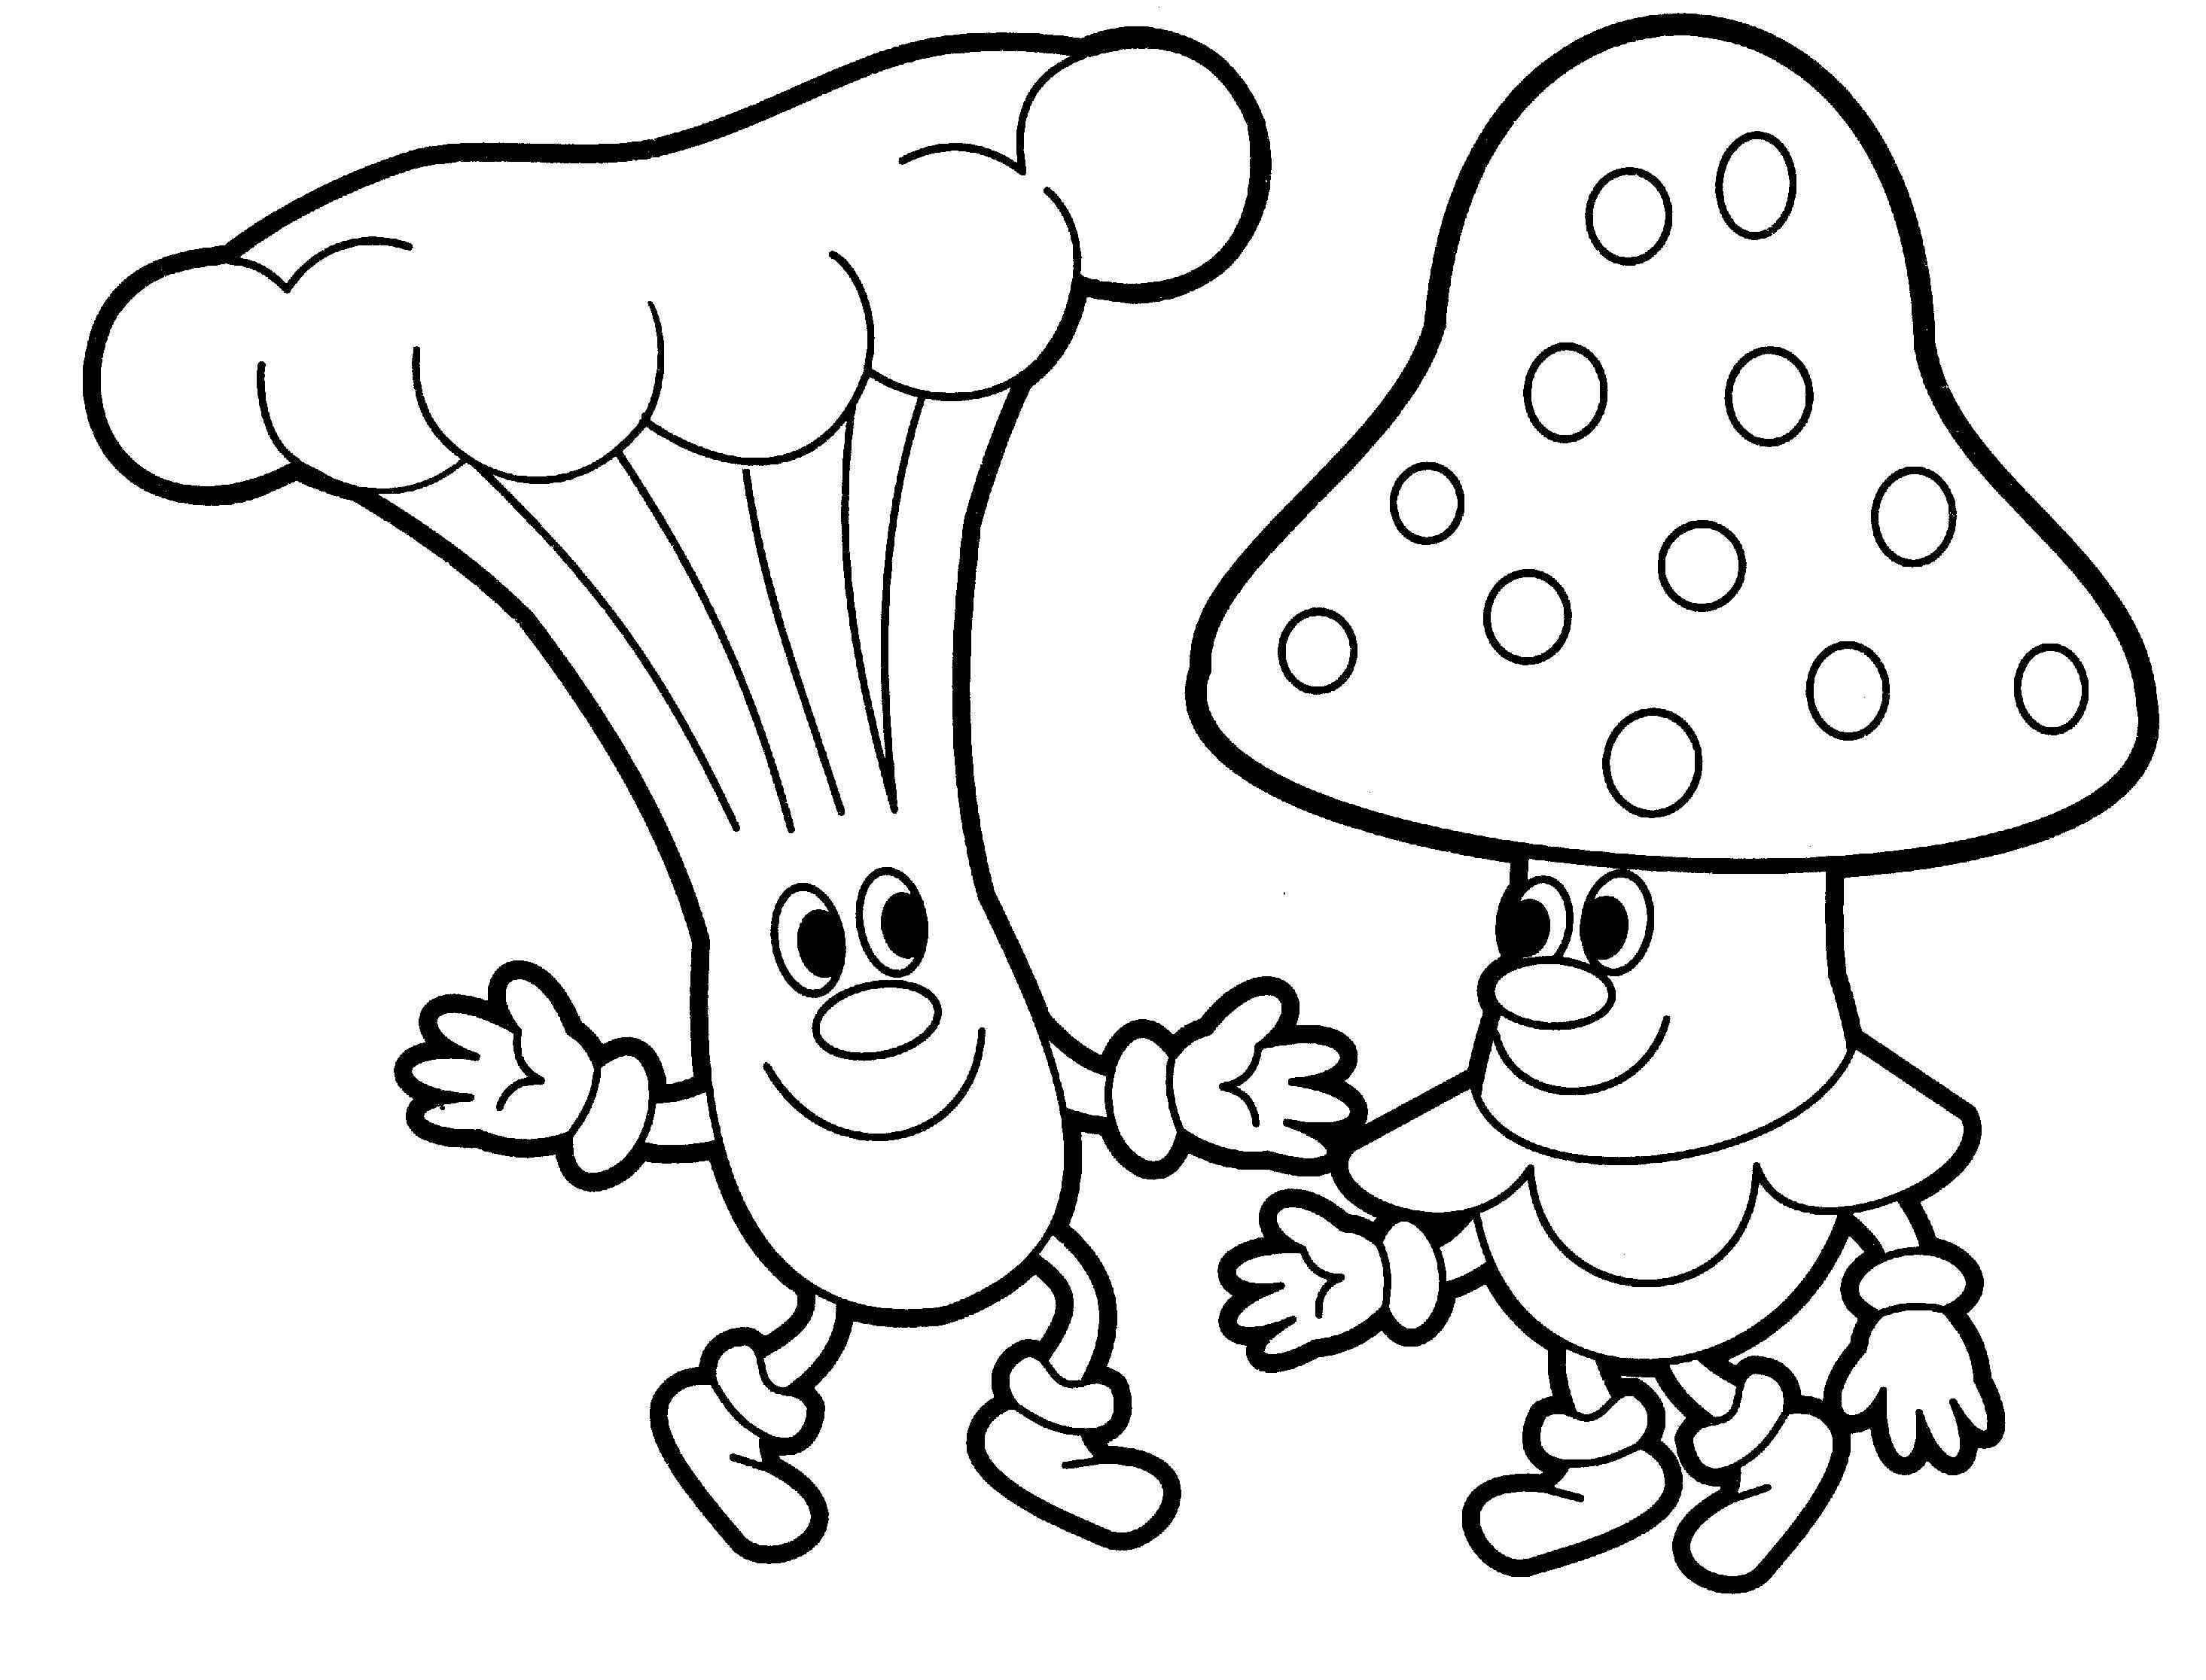 Plant Coloring Pages To Print - Coloring